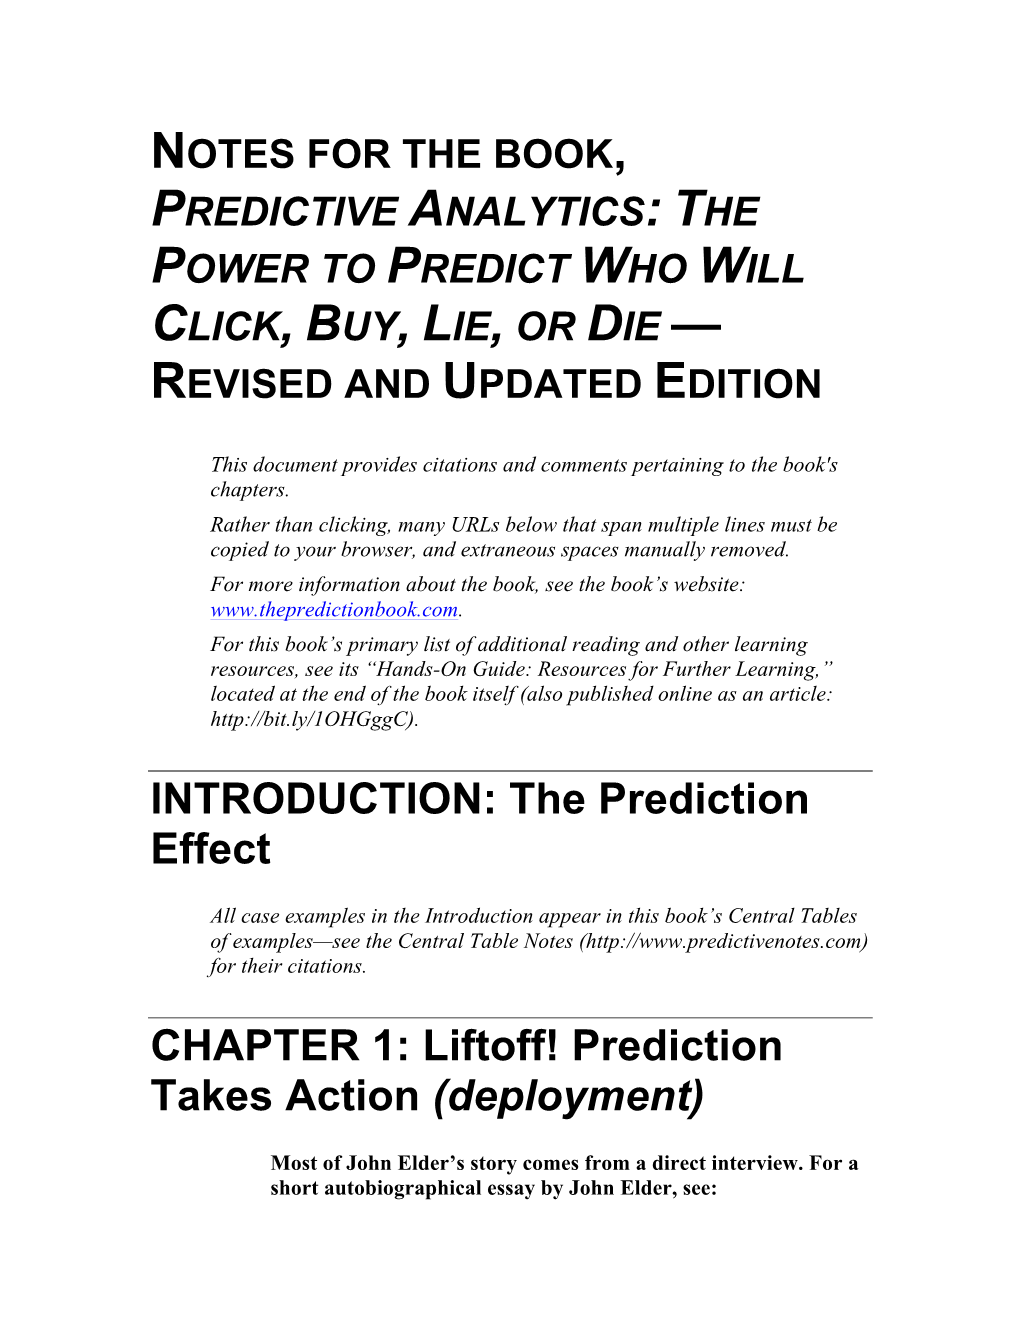 The Prediction Effect CHAPTER 1